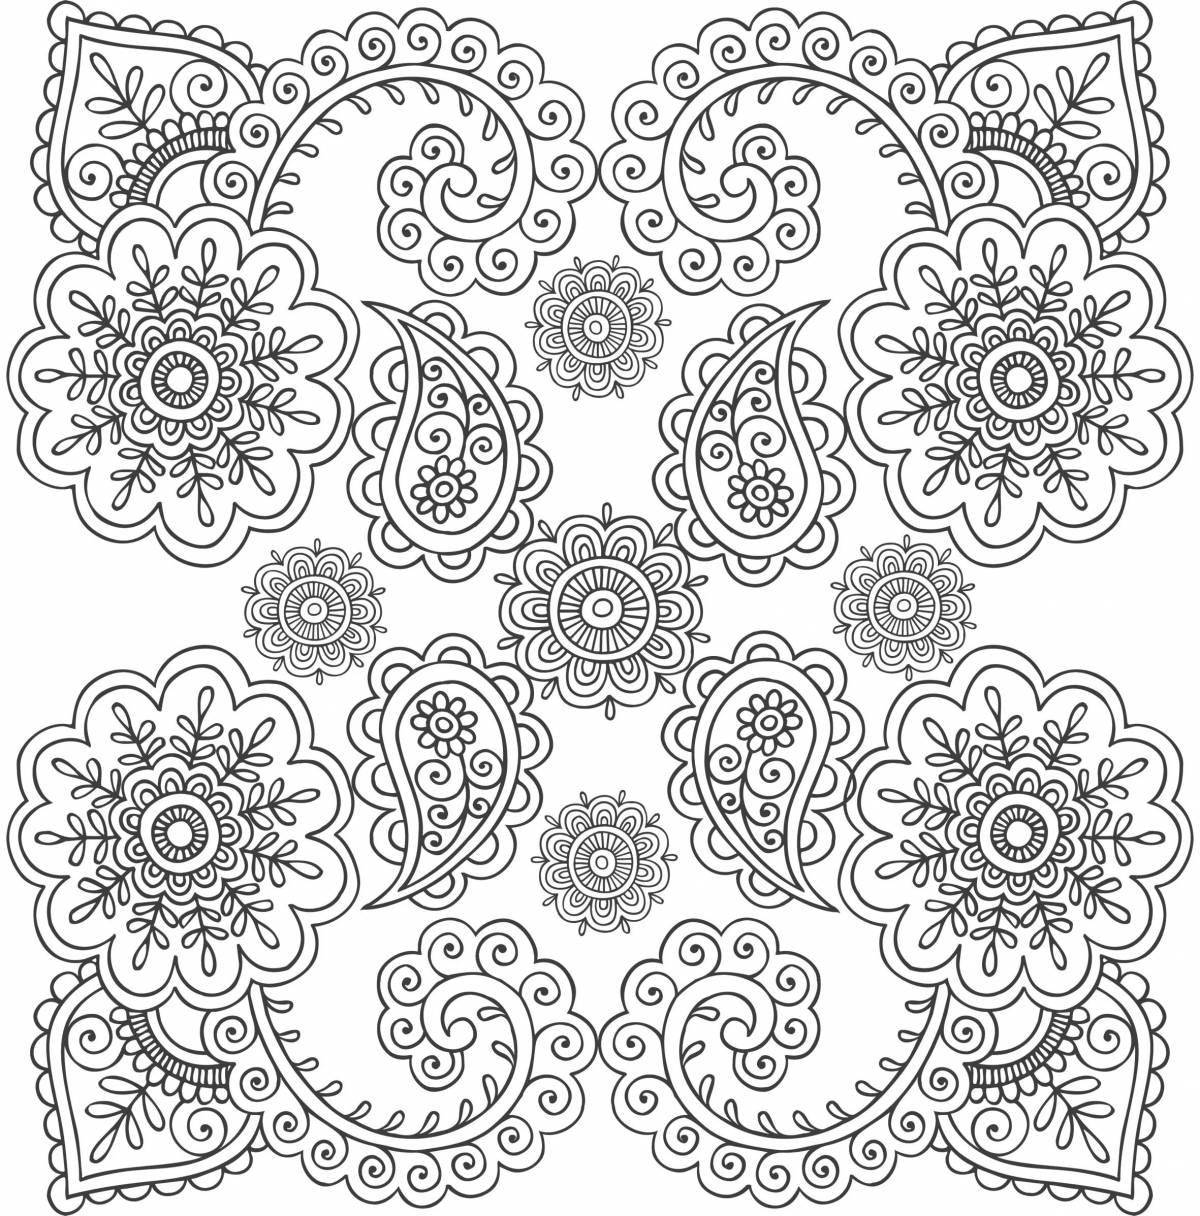 Fascinating coloring with a pattern